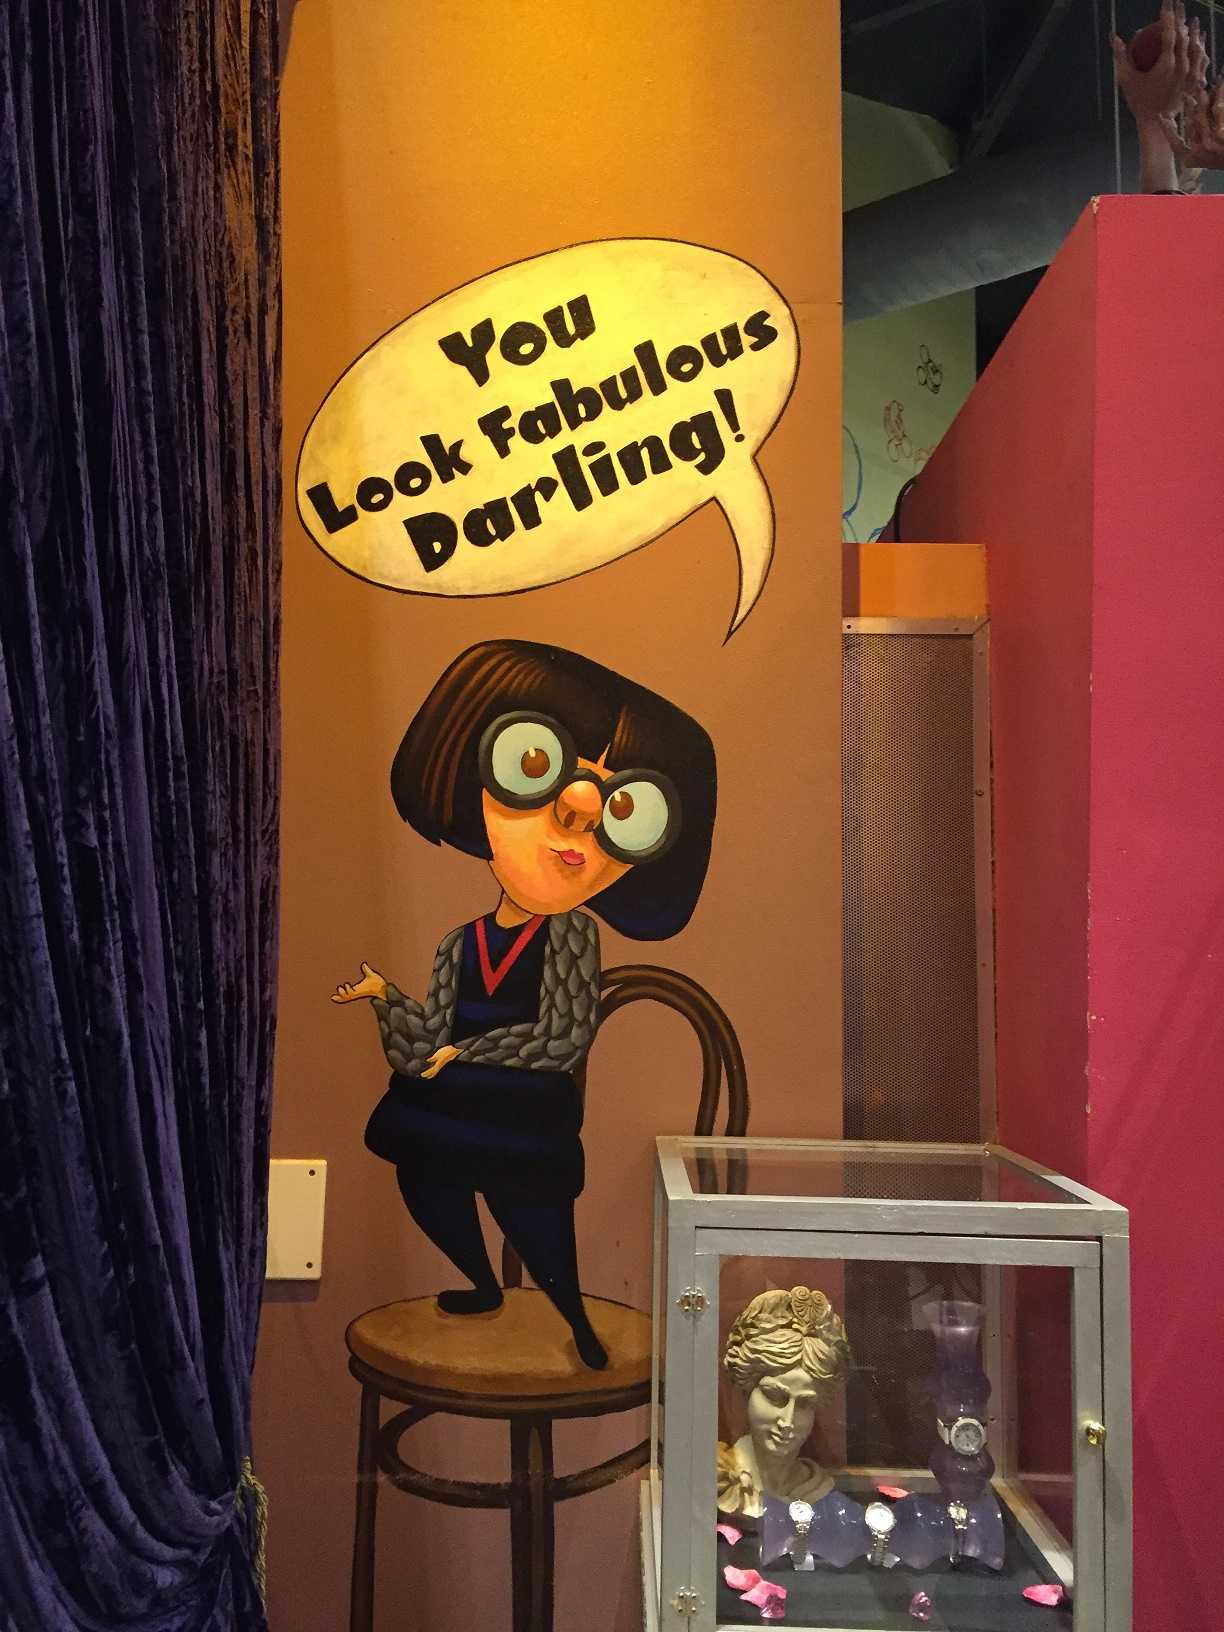 EDNA GIVES GREAT ADVICE: Disney surprises are everywhere. In all of the stores, you can see advice like this in every corner.